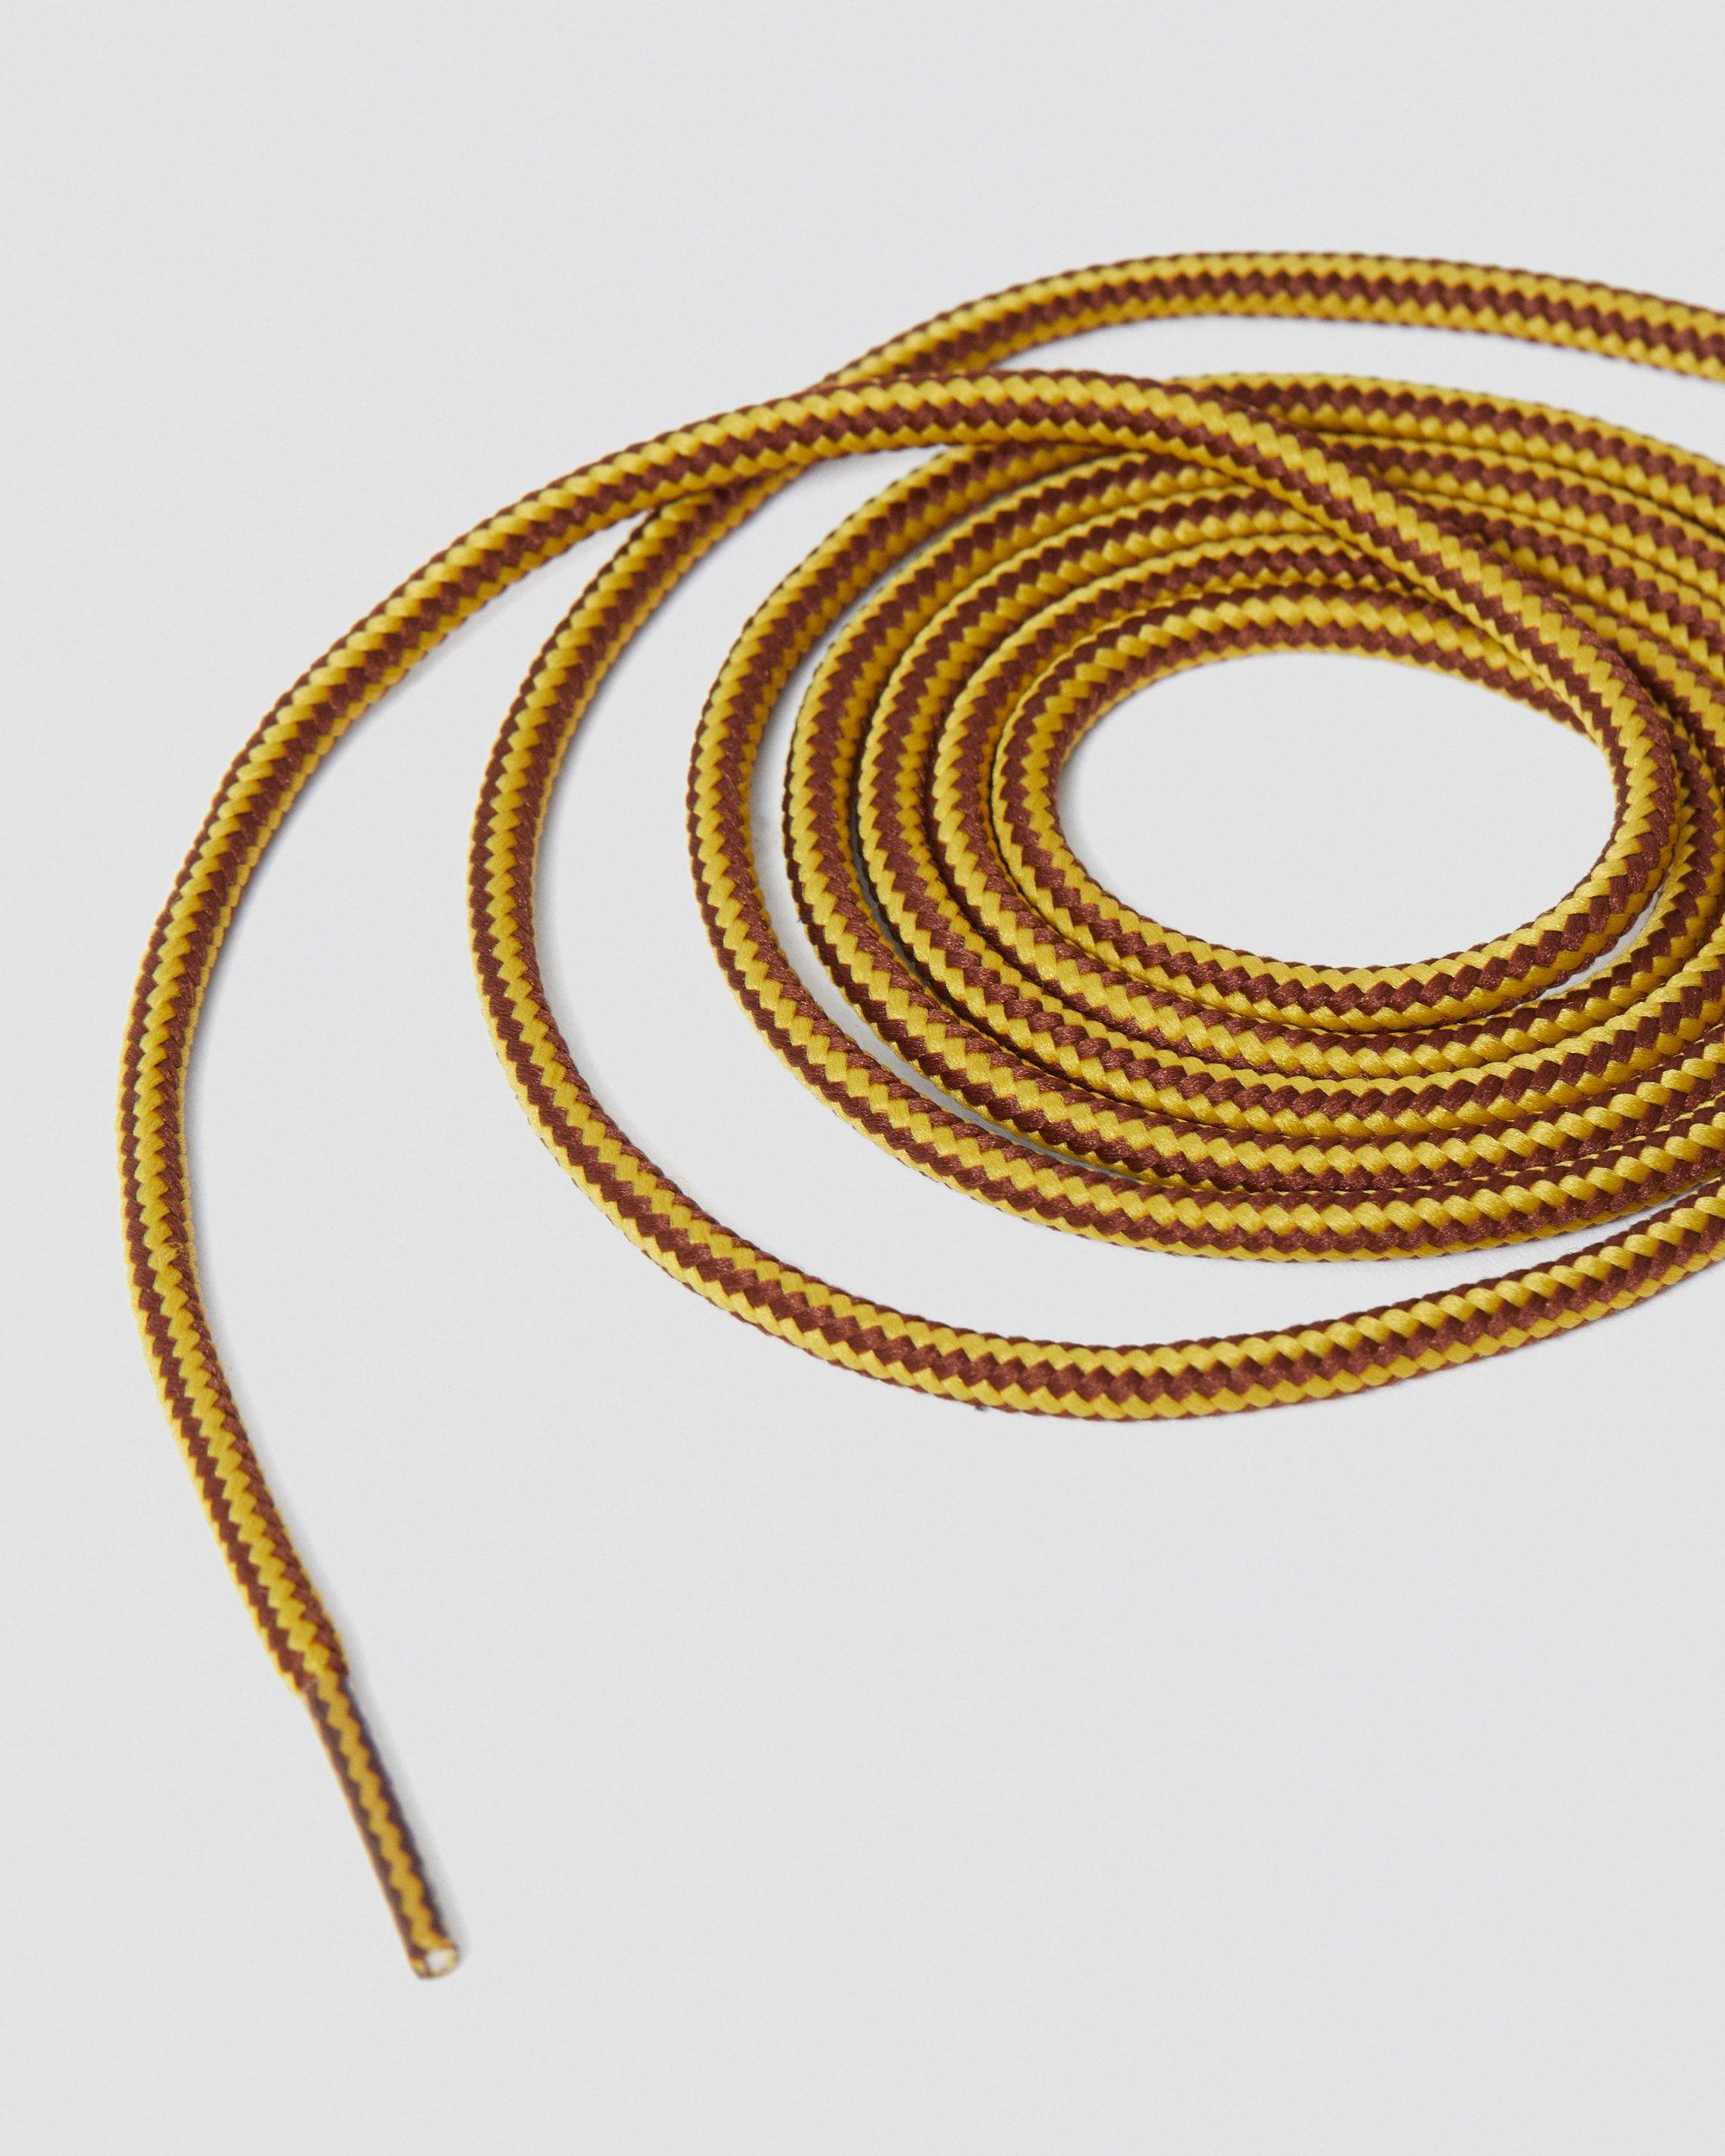 55 Inch Round Shoe Laces (8-10 Eye) in Brown+Yellow